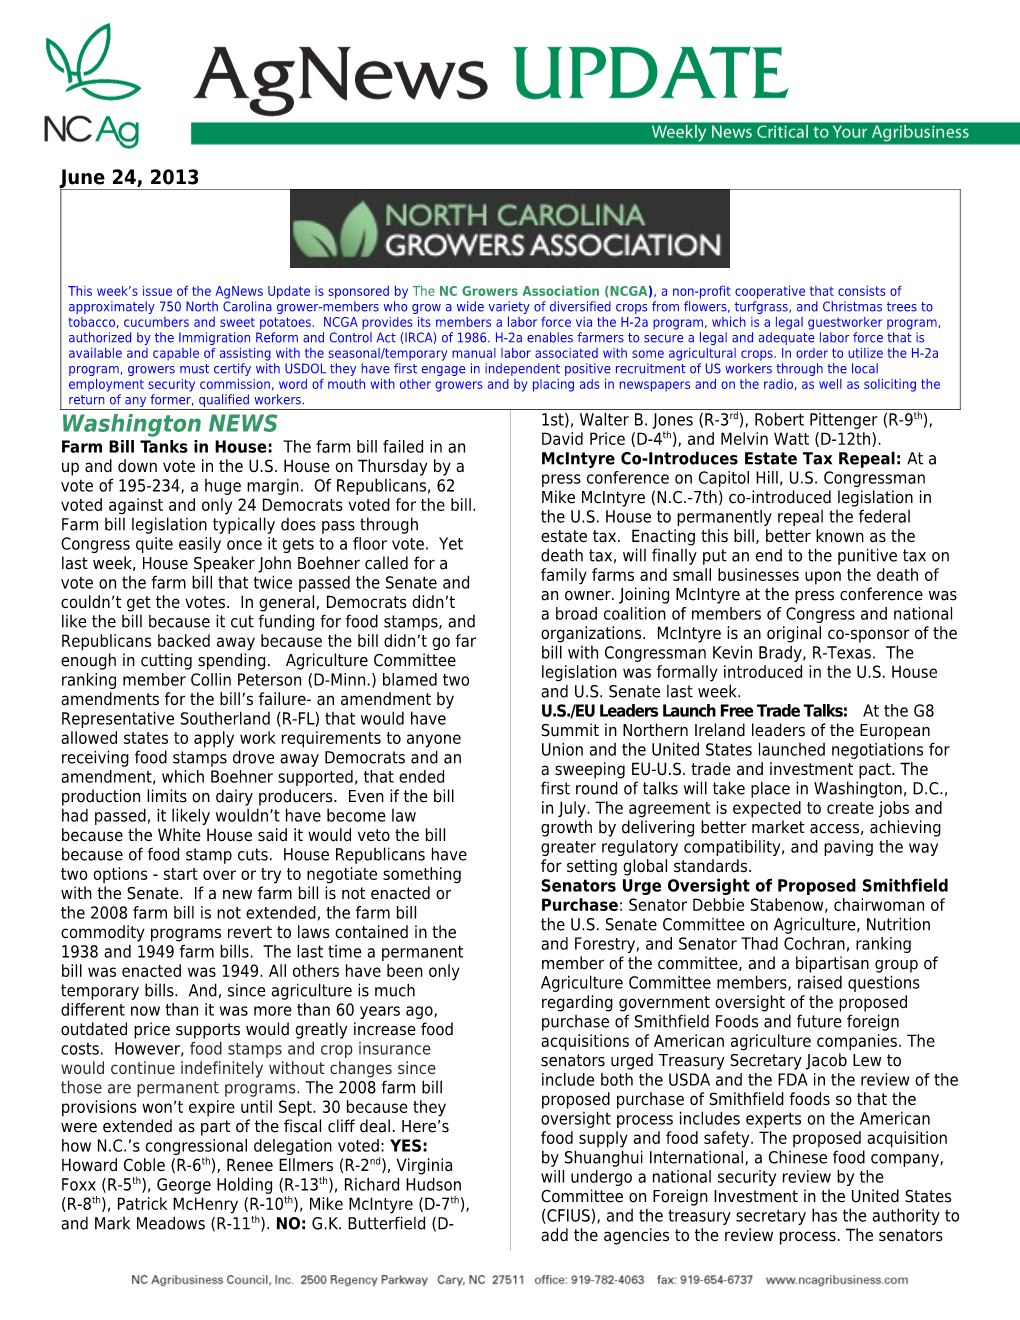 This Week S Issue of the Agnews Update Is Sponsored by the NC Growers Association (NCGA)